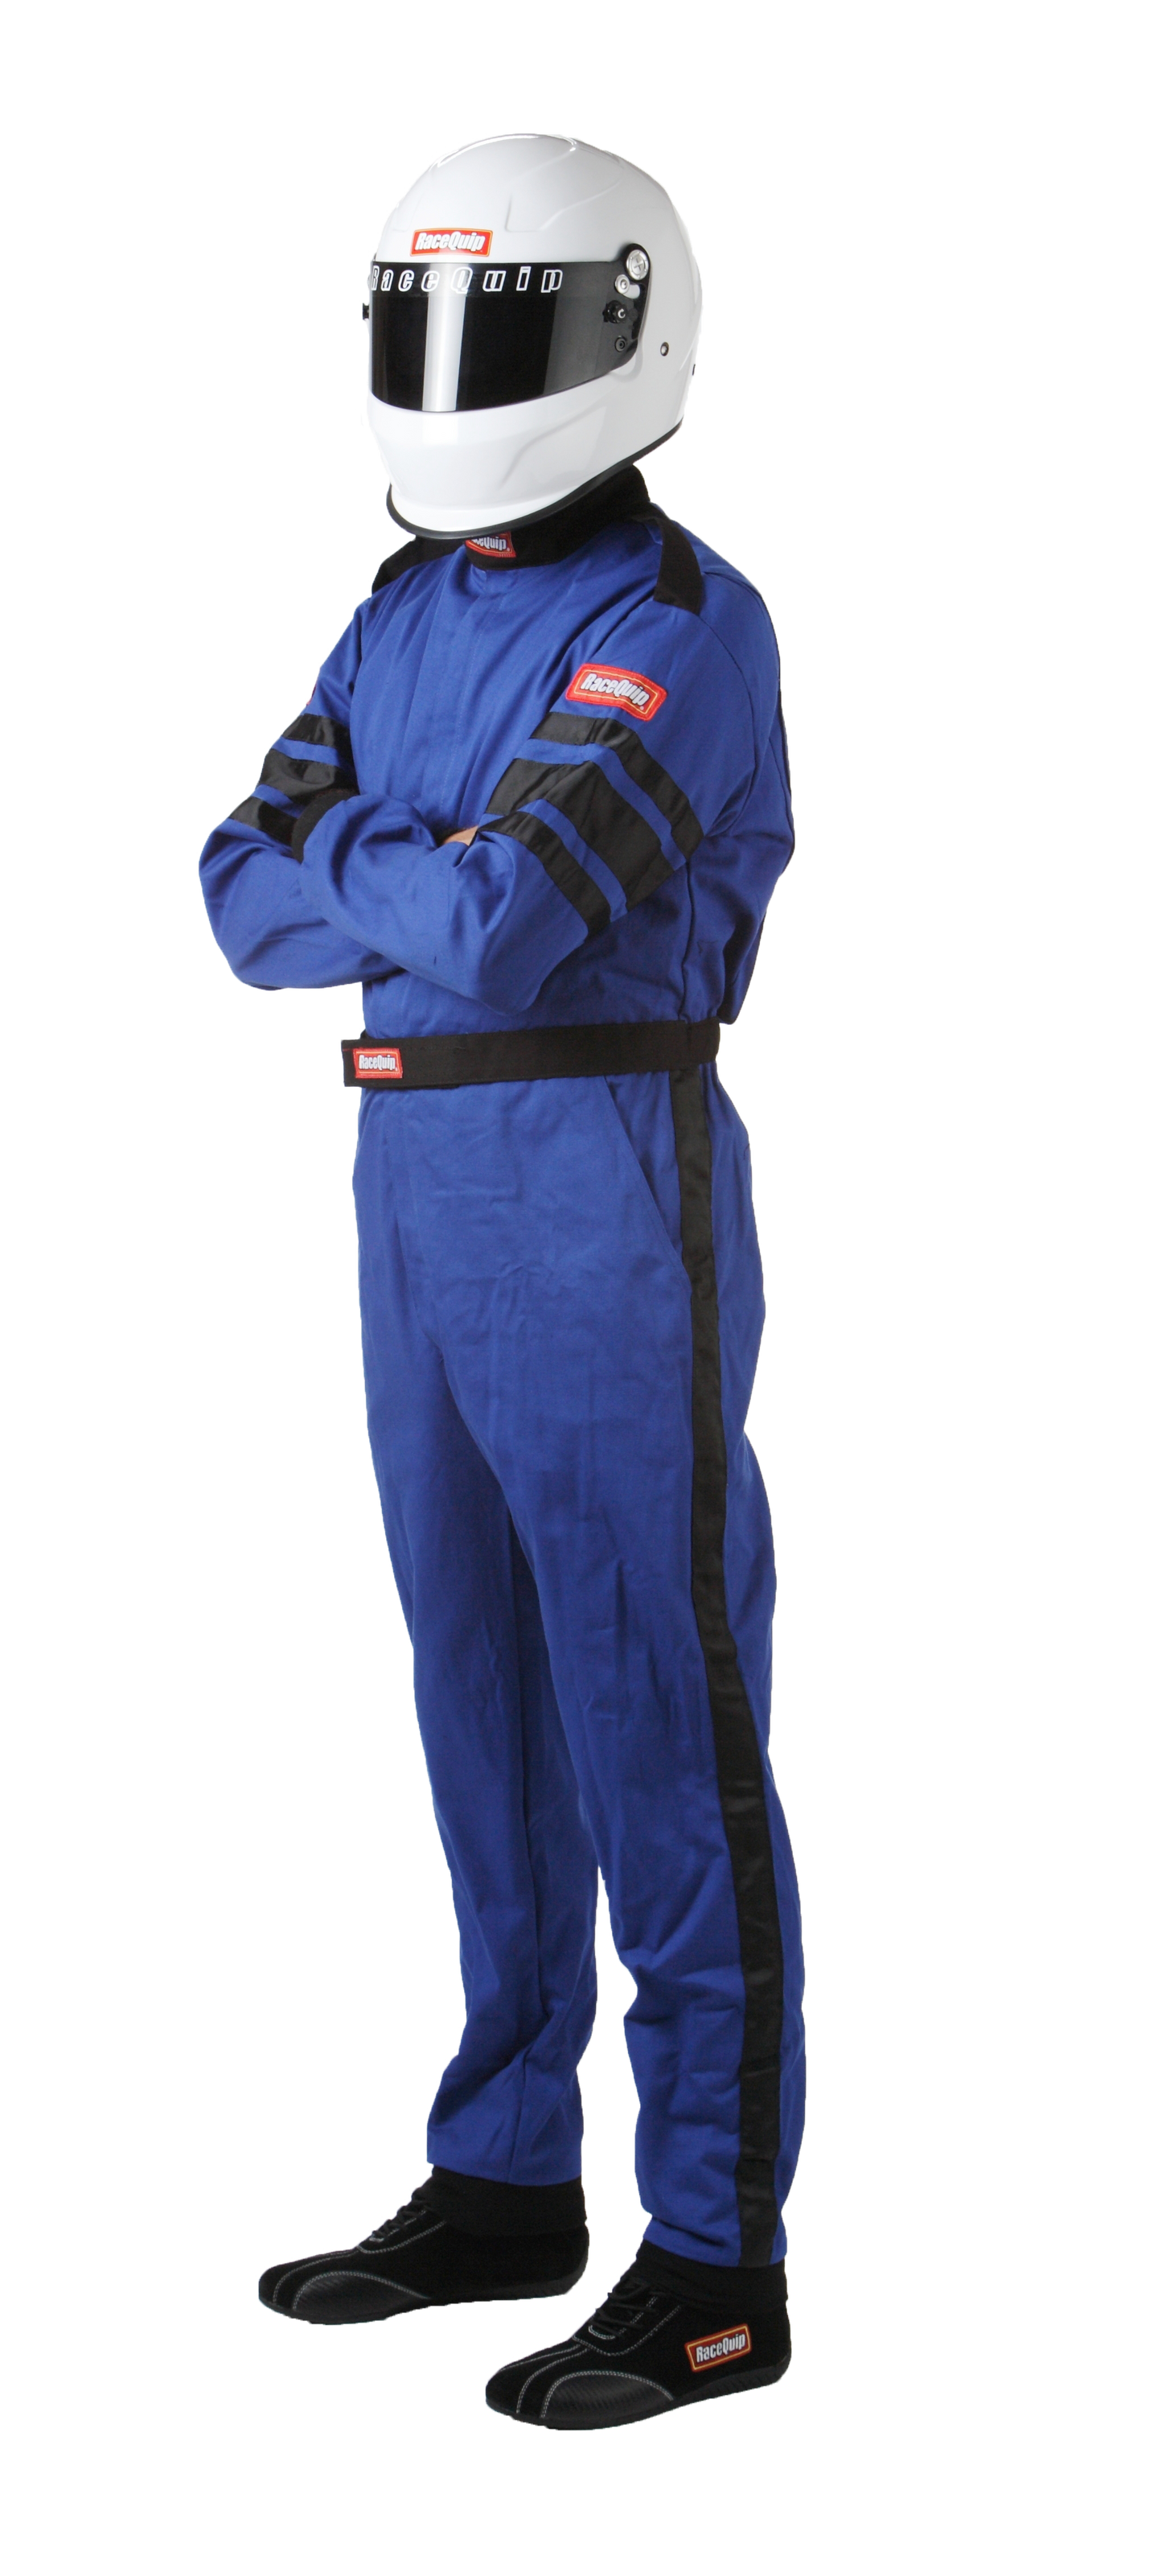 RaceQuip - One Piece Single Layer Racing Driver Fire Suit SFI 3.2A/ 1